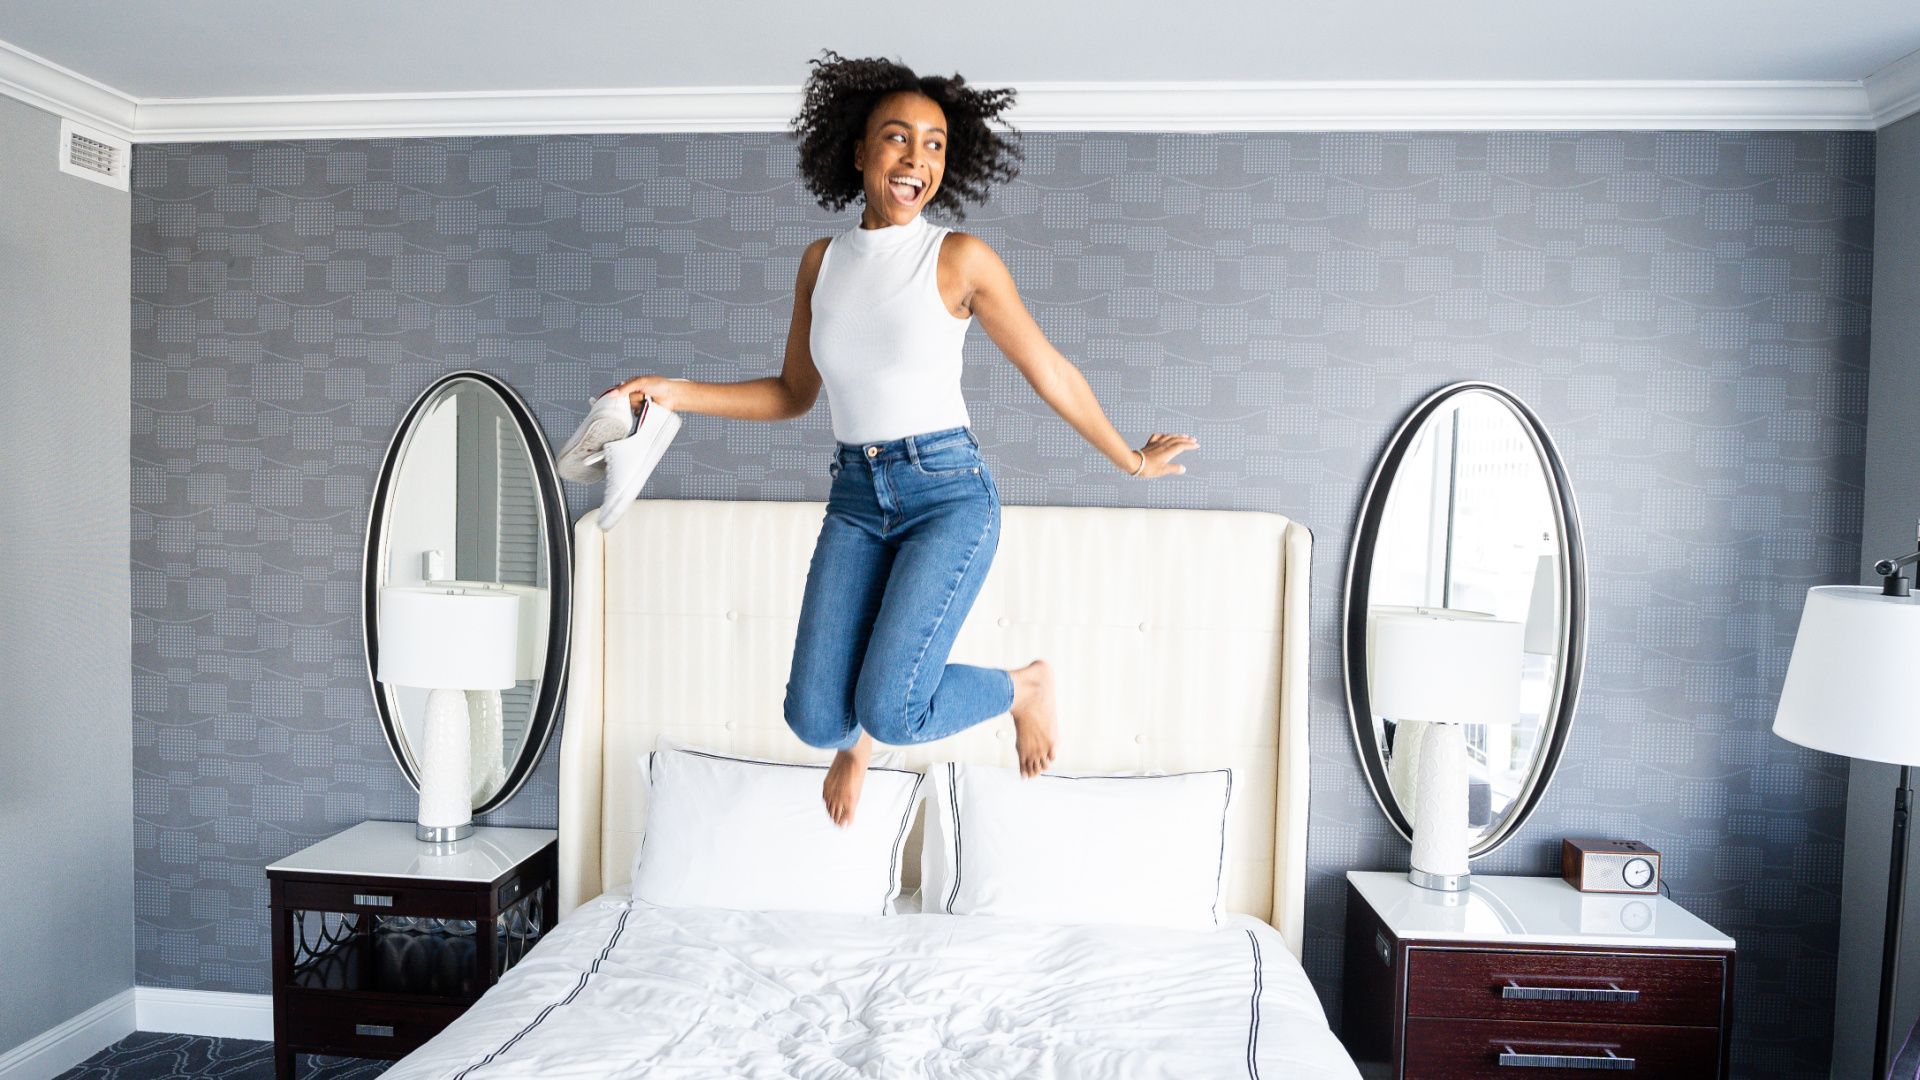 woman jumping on a bed with glee